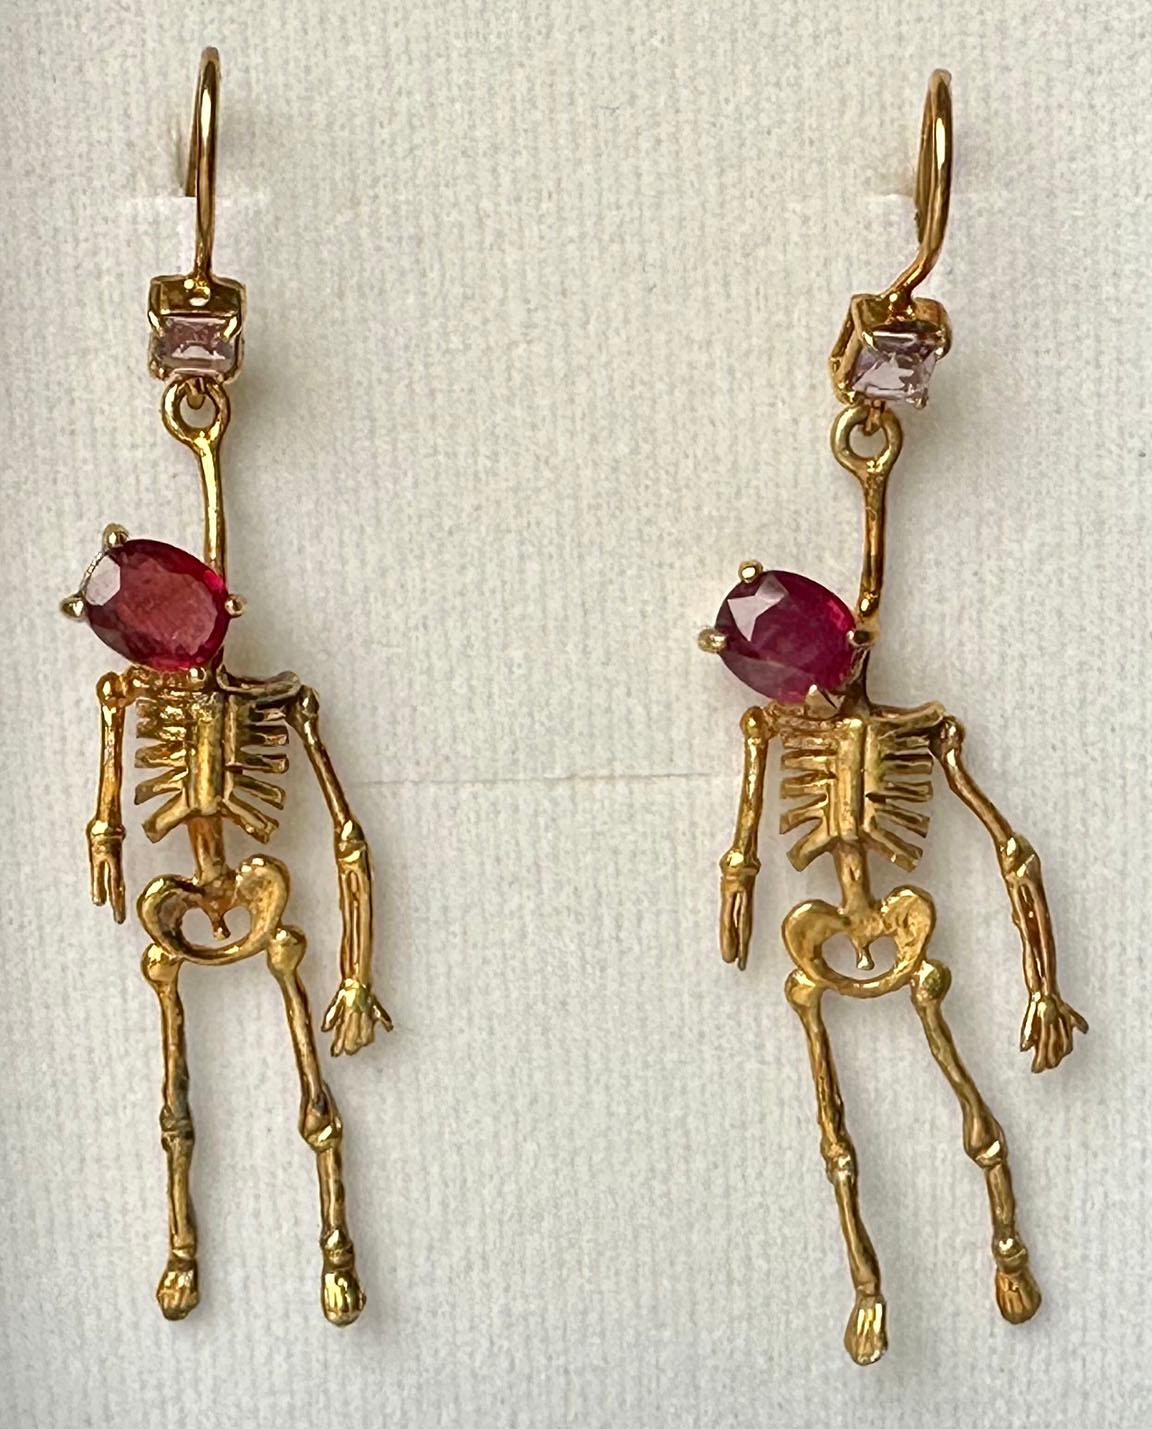 Gold Plated Silver Skeleton Earrings set with Ruby and Tourmaline. These fun earrings are little skeletons with oval Ruby heads, accented with square Tourmalines mounted on the ear hooks. 

Originally from San Diego, California, Kary Adam lived in